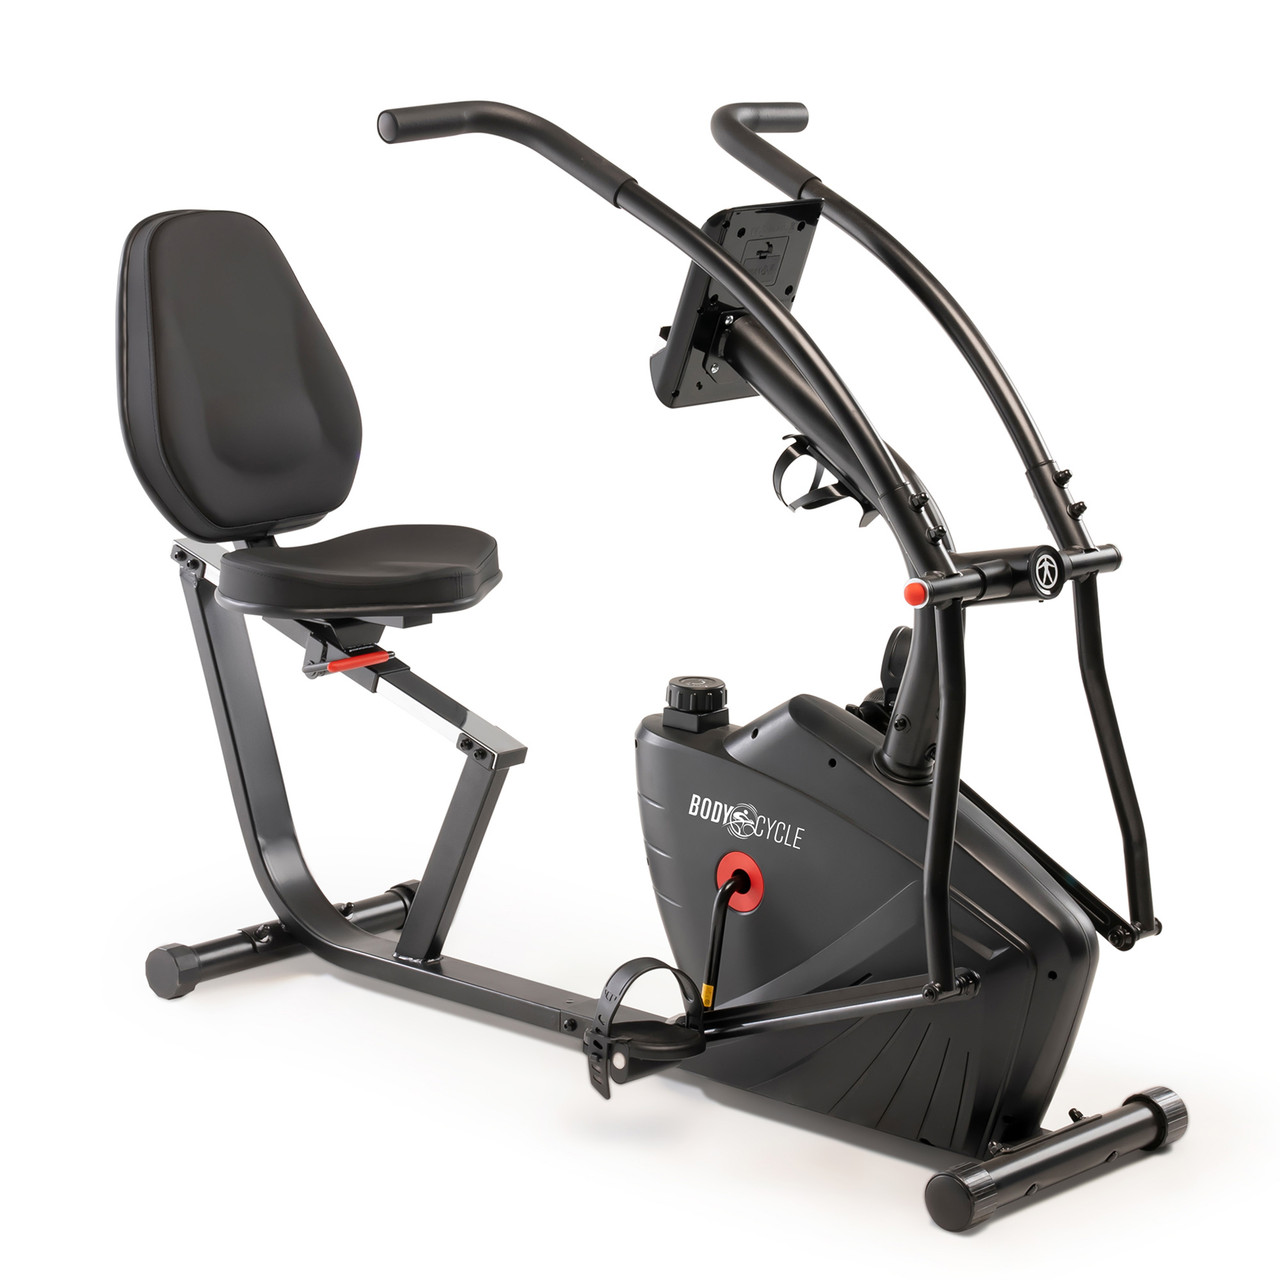 Persoon belast met sportgame Teleurstelling delen Body Cycle Recumbent Bike - JX-7301 Provides a great Cardio Workout